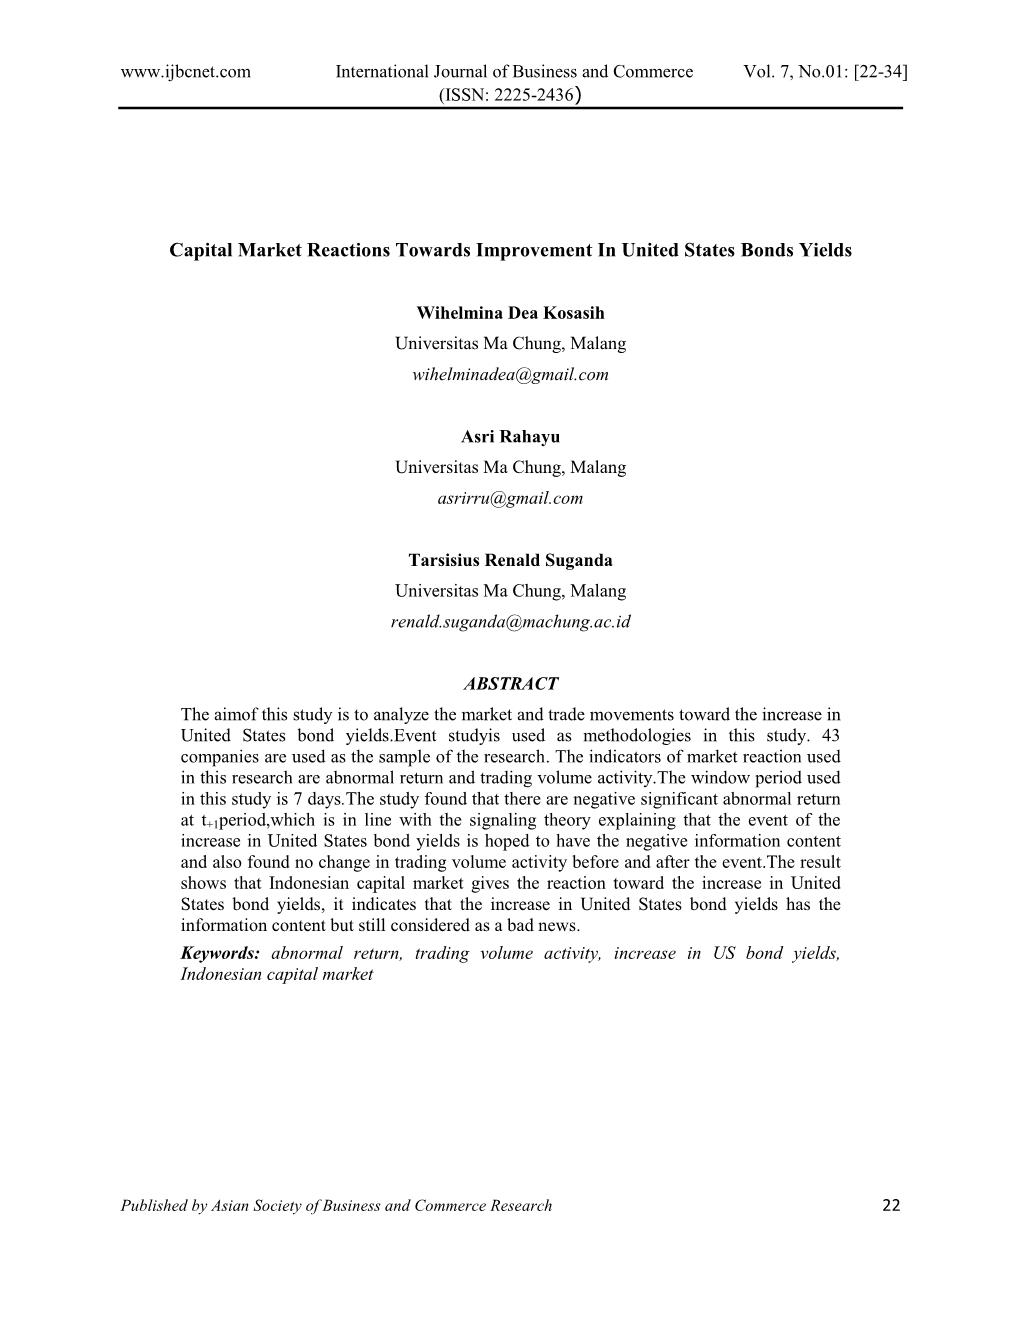 Capital Market Reactions Towards Improvement in United States Bonds Yields